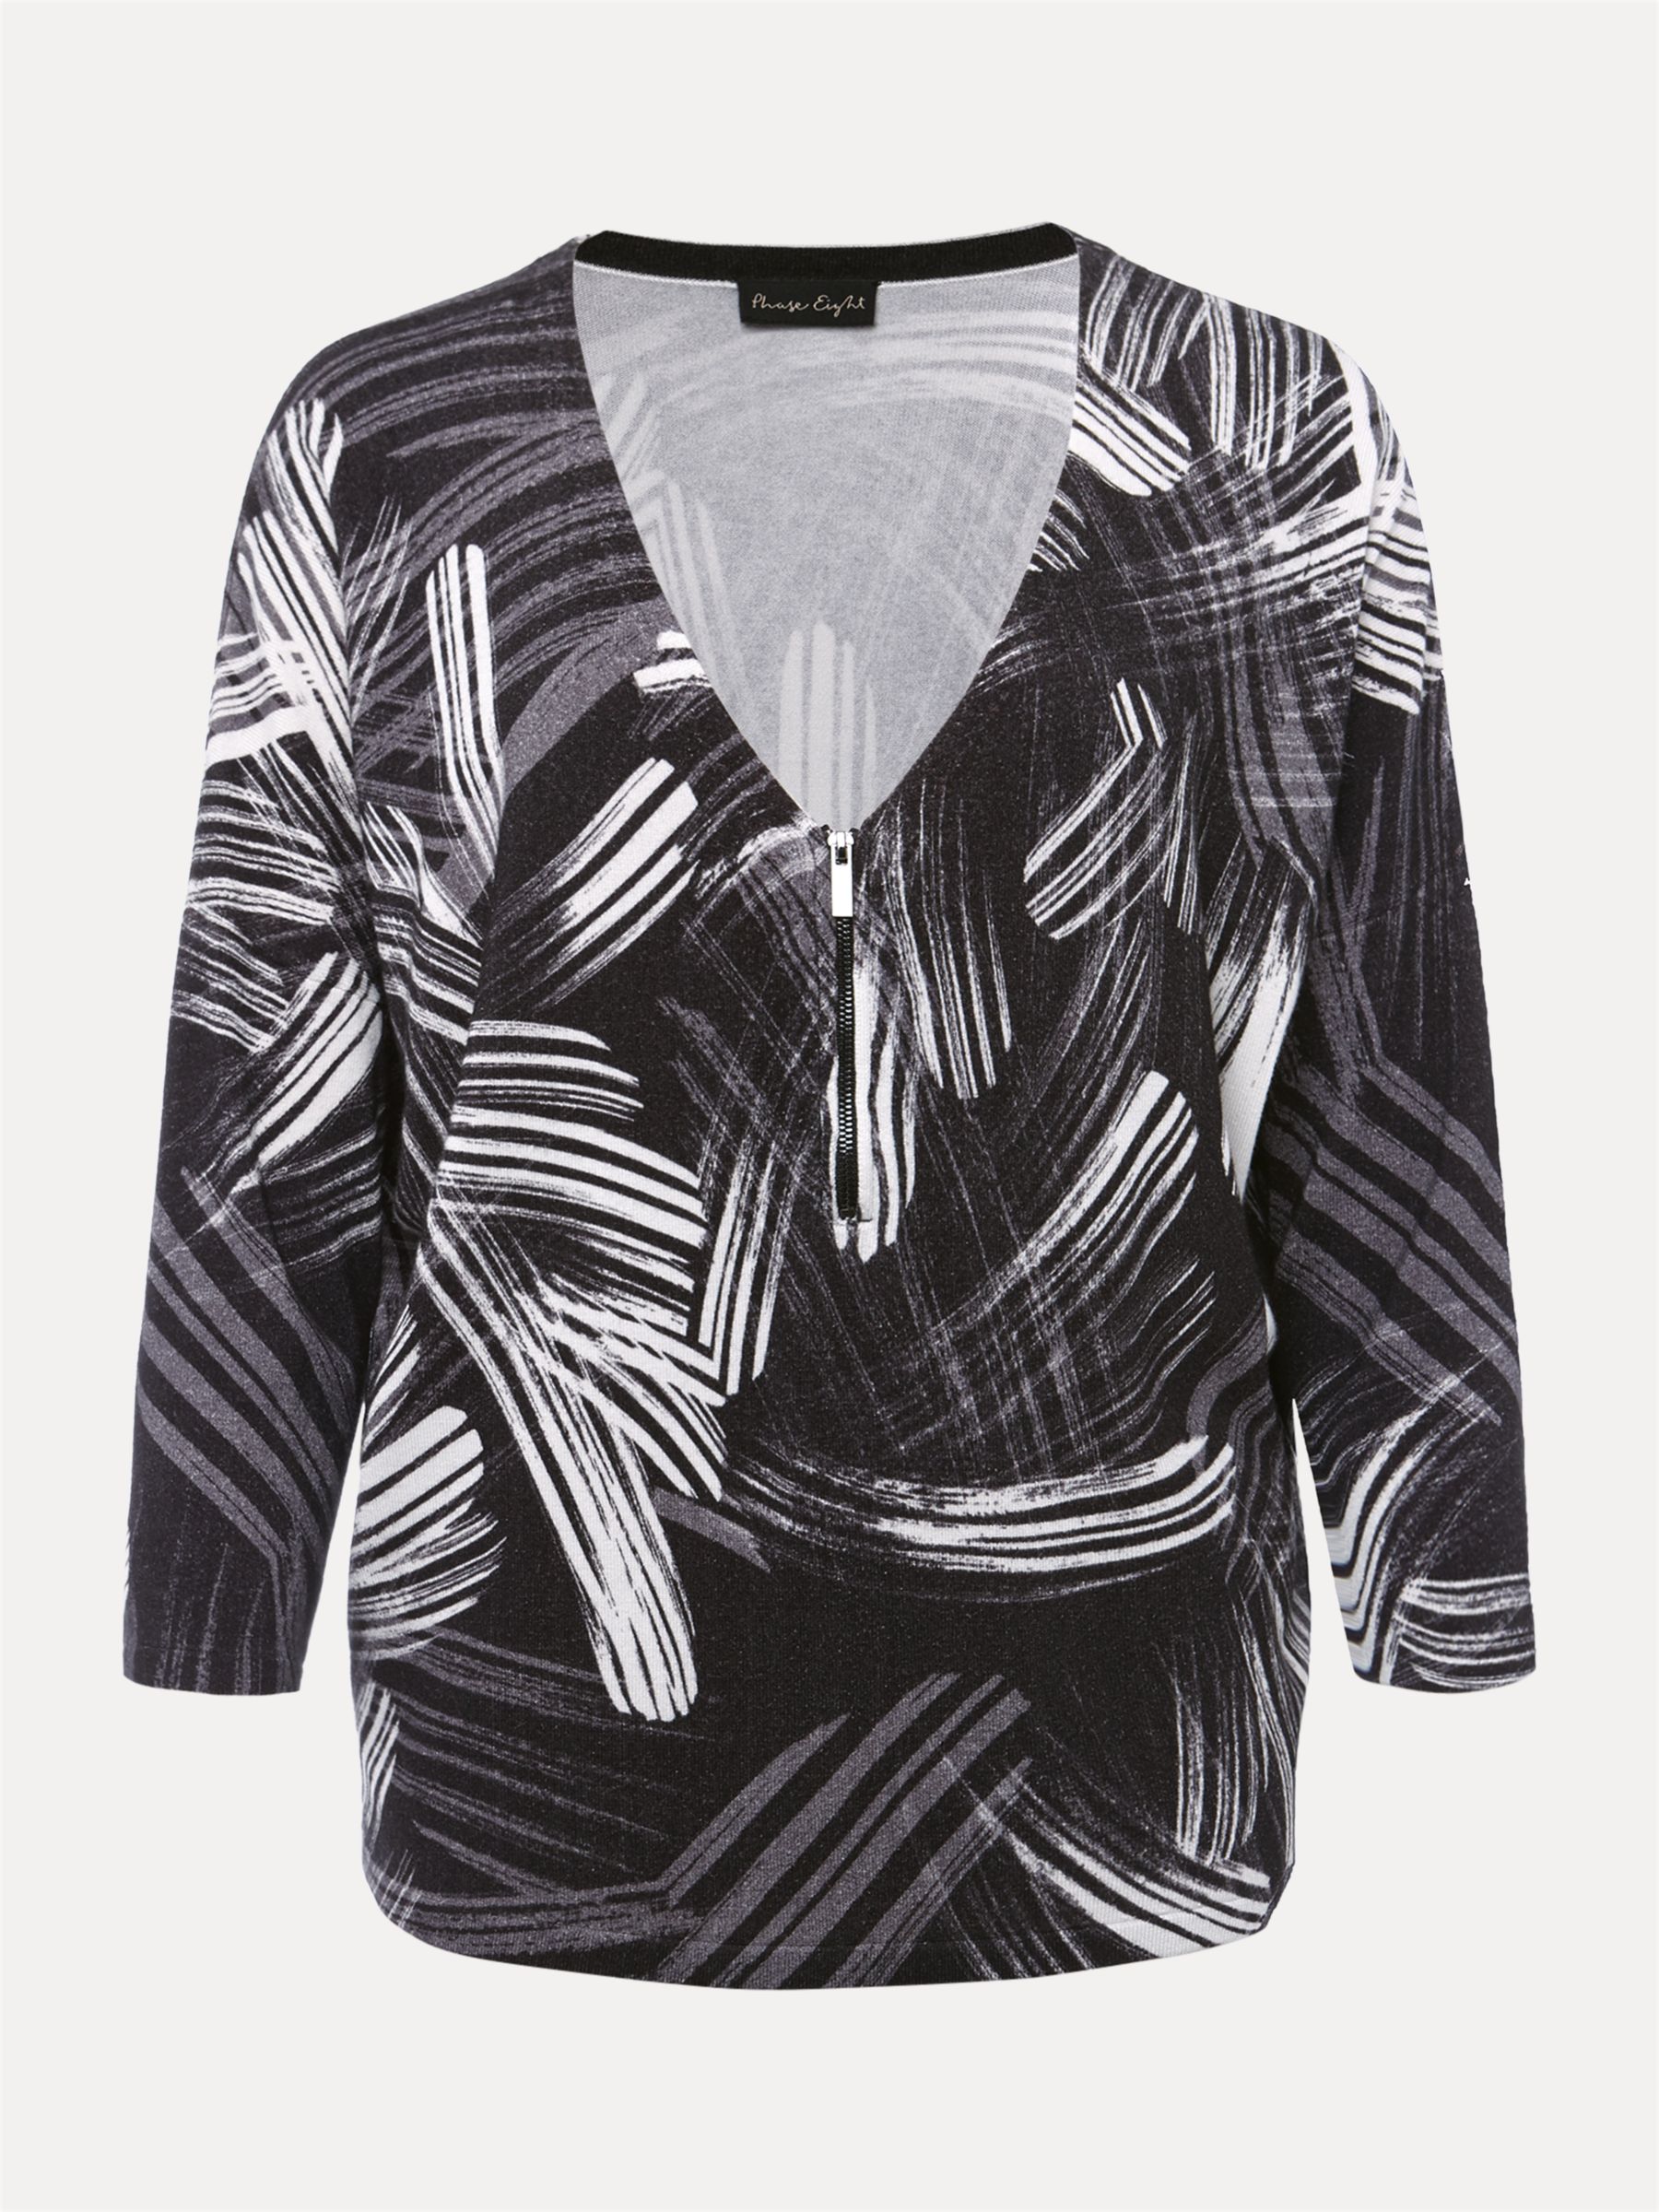 Buy Phase Eight Adara V-Neck Abstract Jersey Top, Black/Multi Online at johnlewis.com